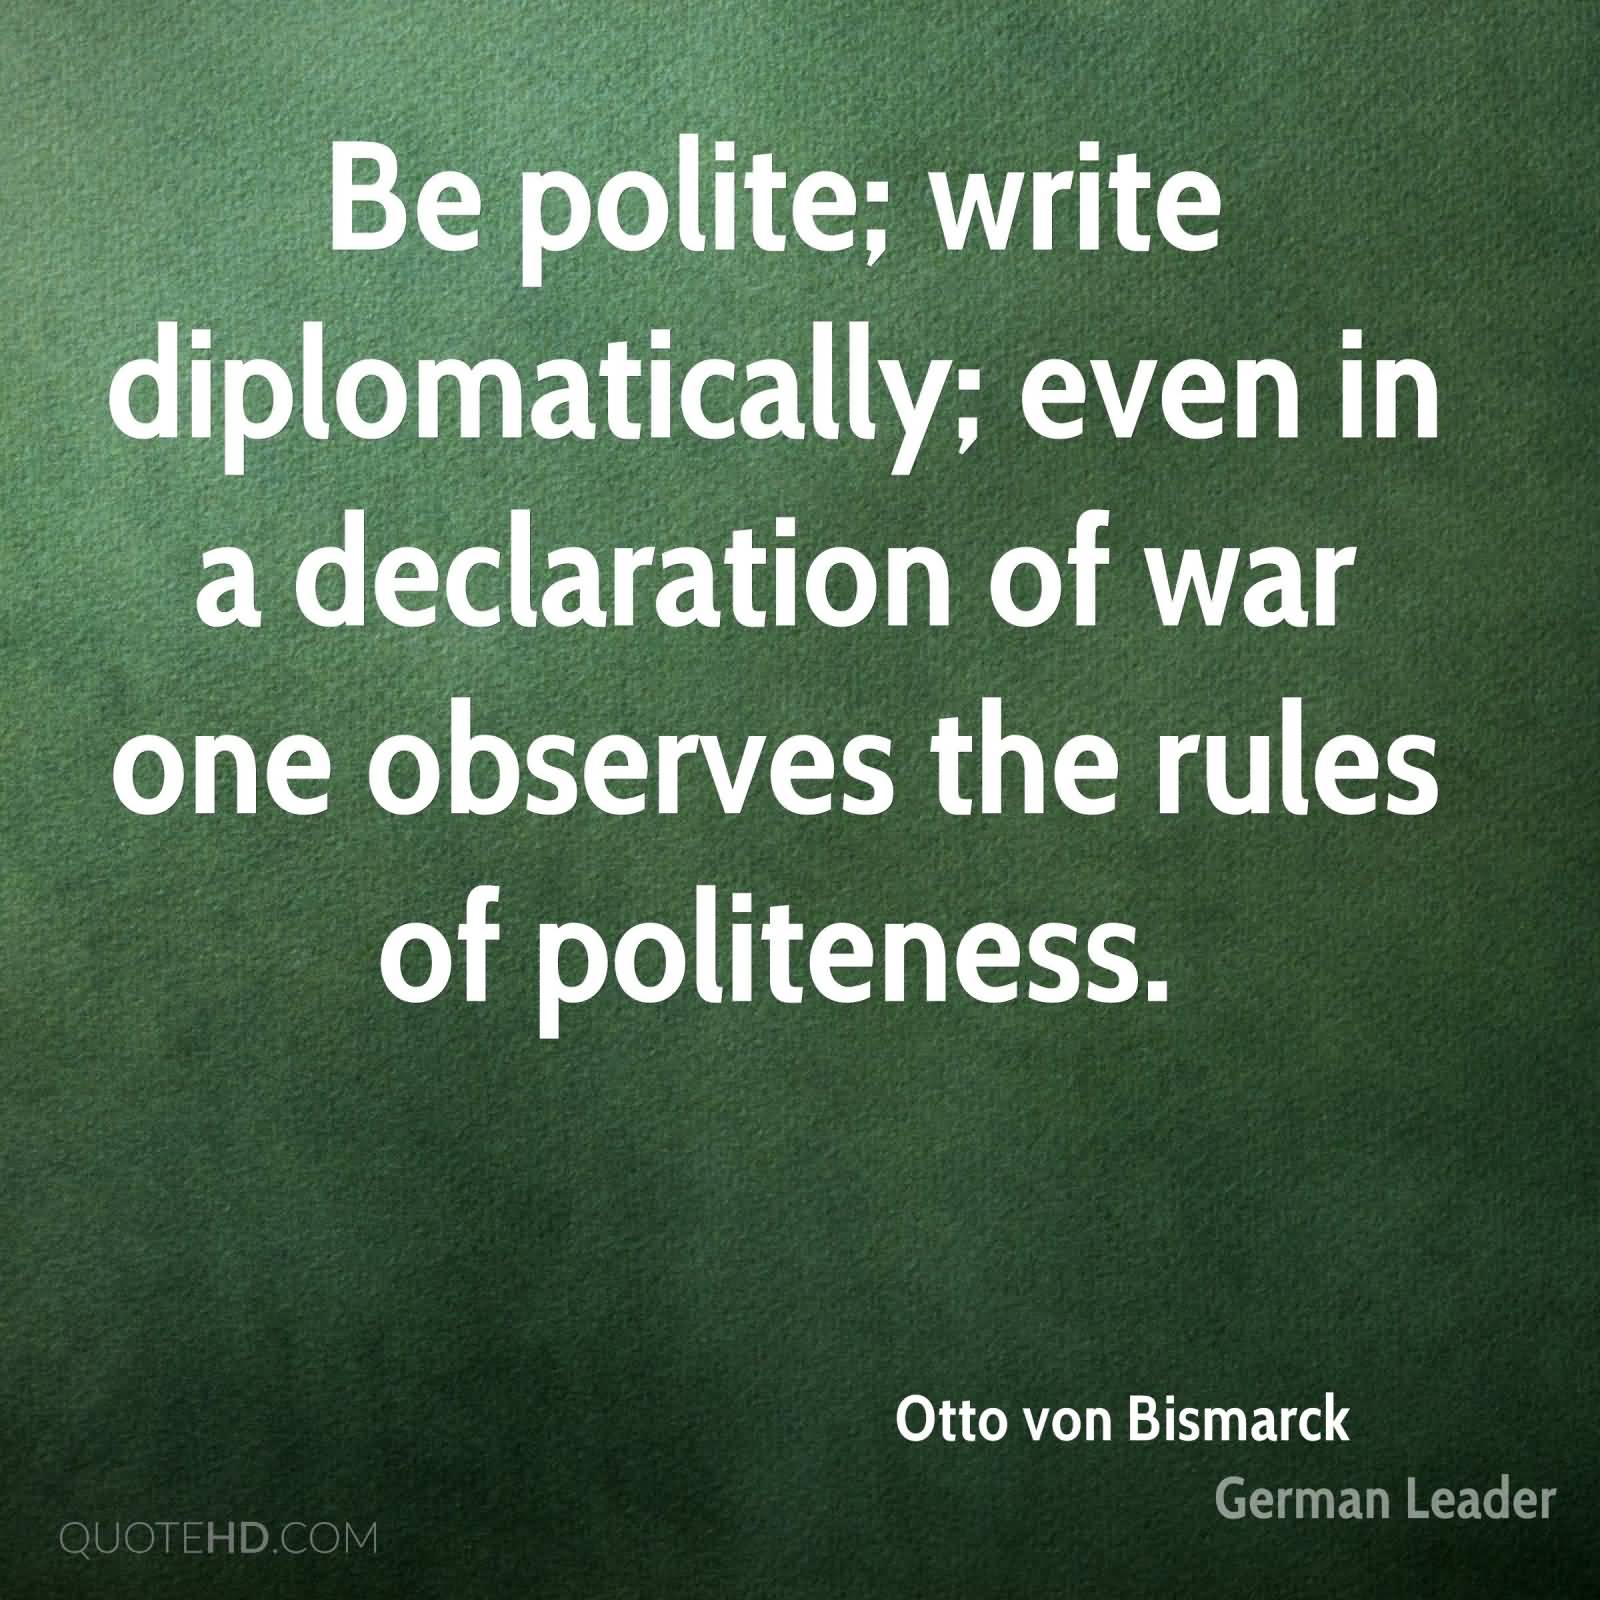 Be polite; write diplomatically; even in a declaration of war one observes the rules of politeness. Otto von Bismarck